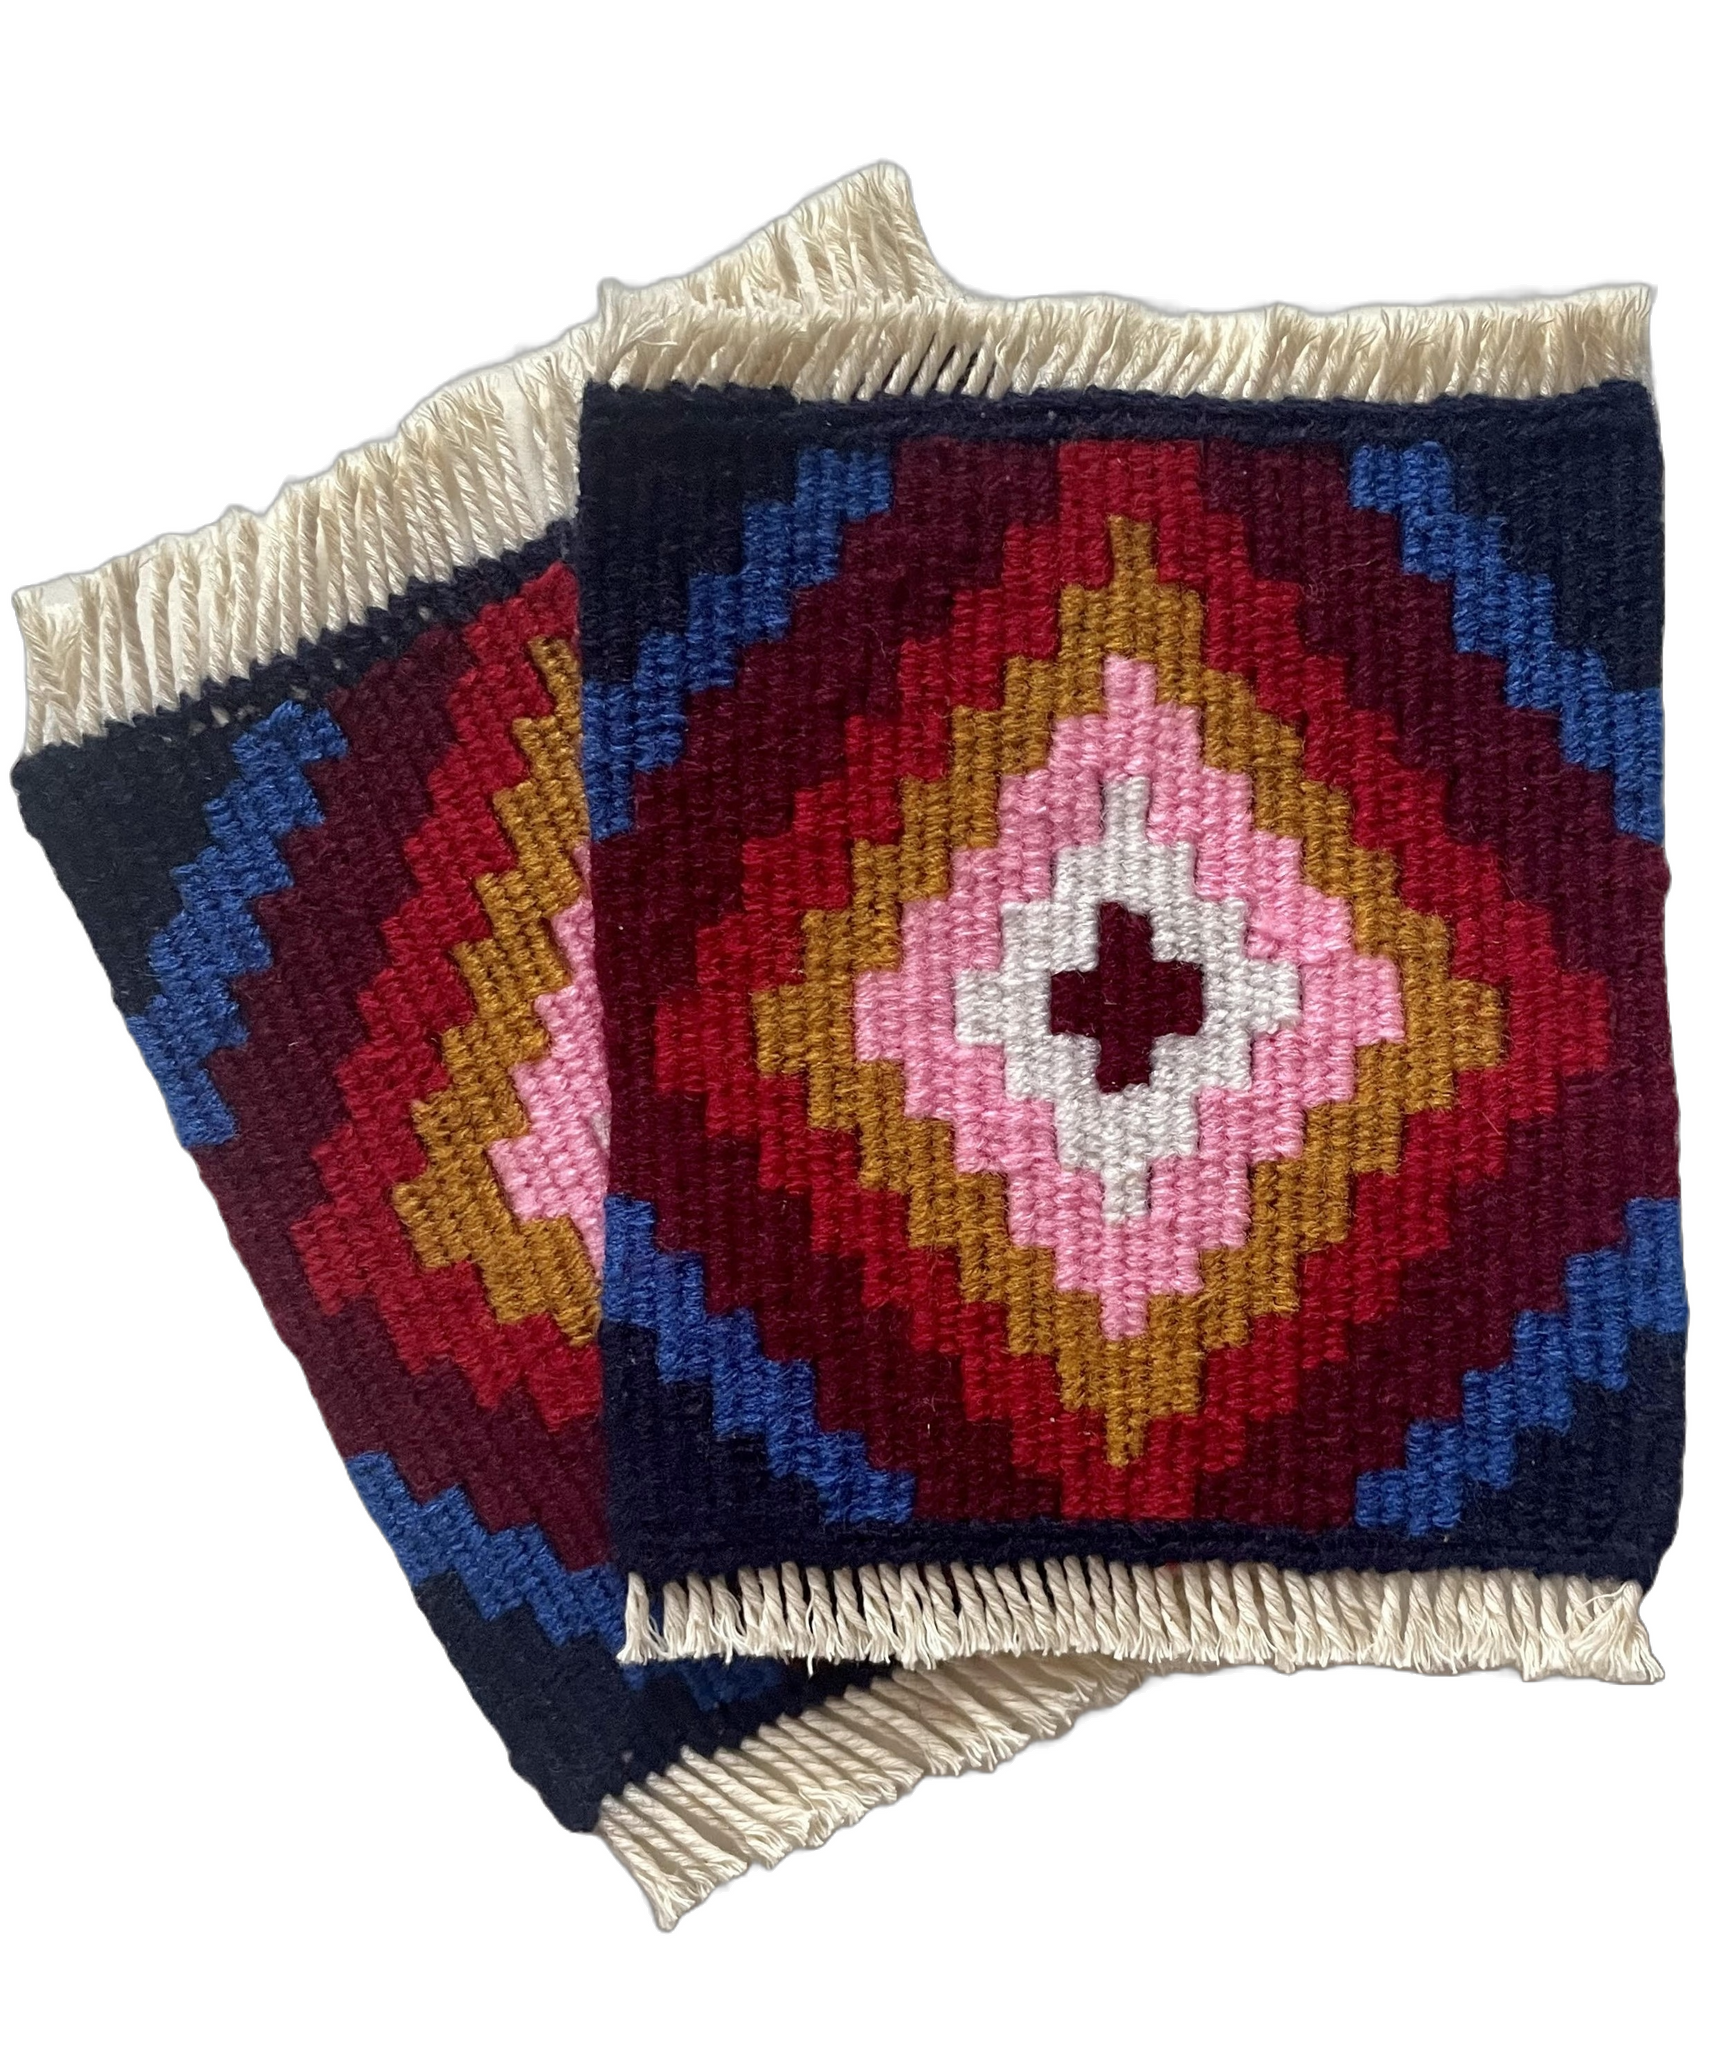 Made in Artsakh Set of Woven Coasters